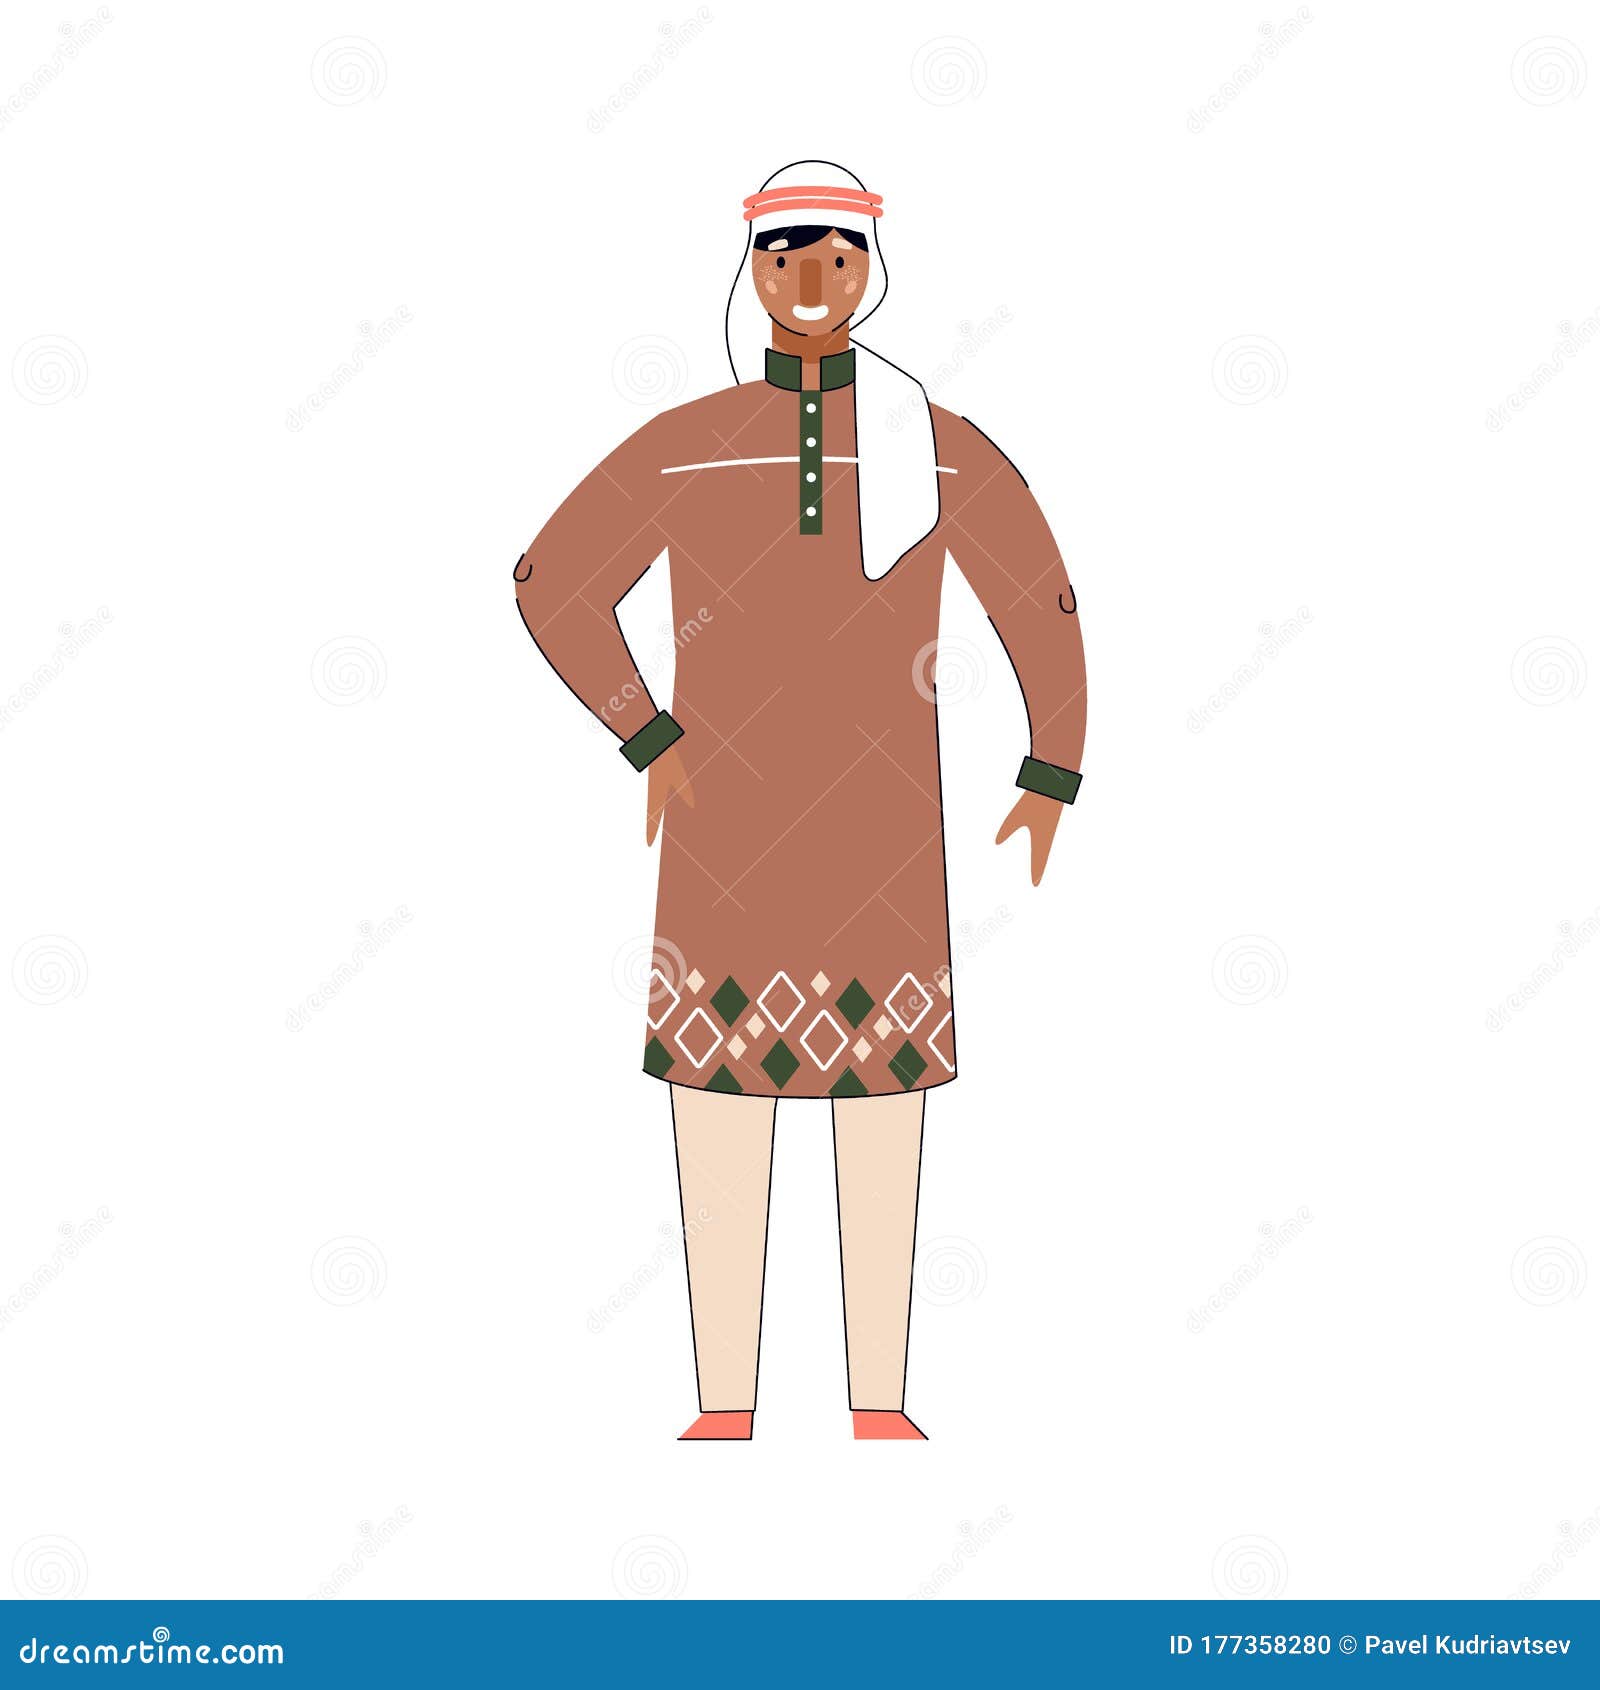 Male Arab Cartoon Character in Traditional Arabic Headscarf and